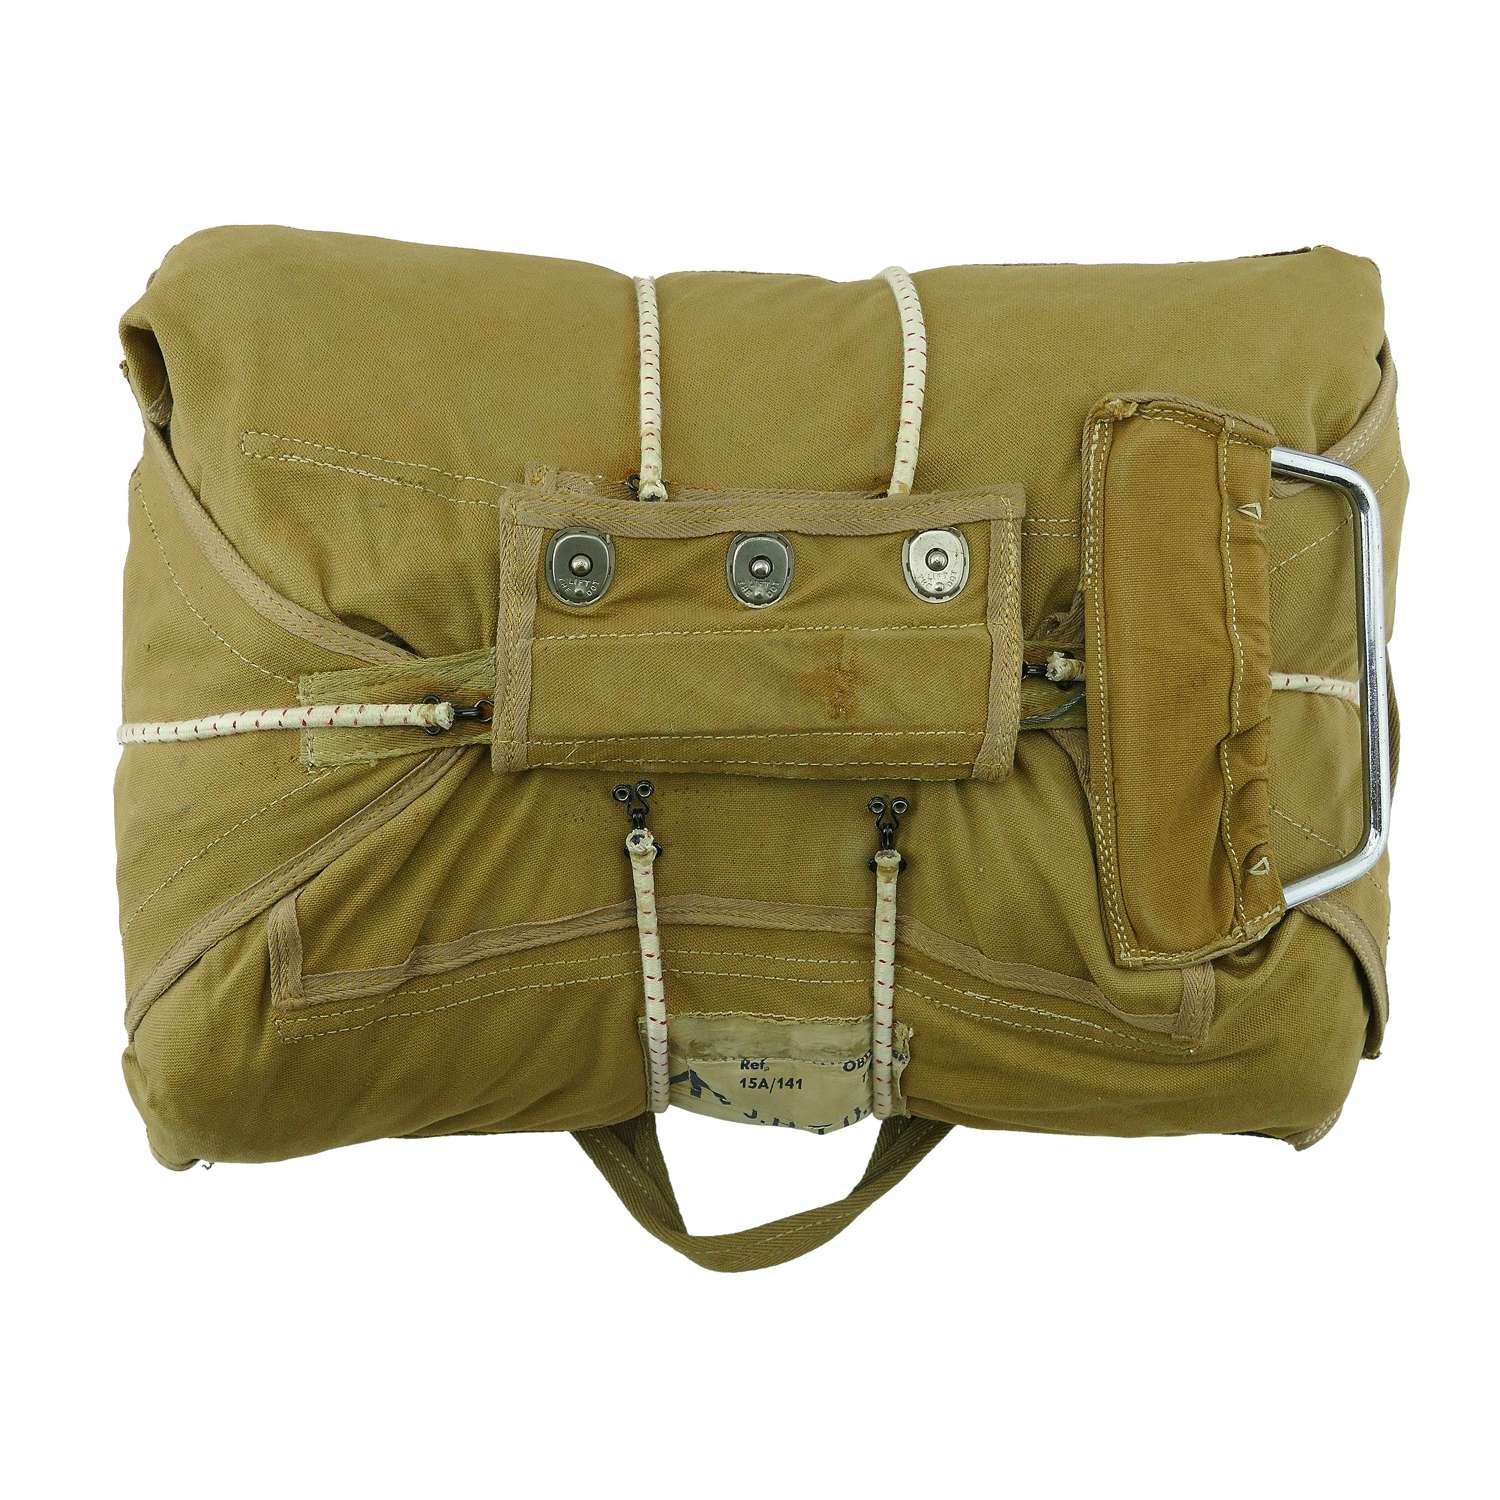 RAF observer type parachute pack c/w canopy